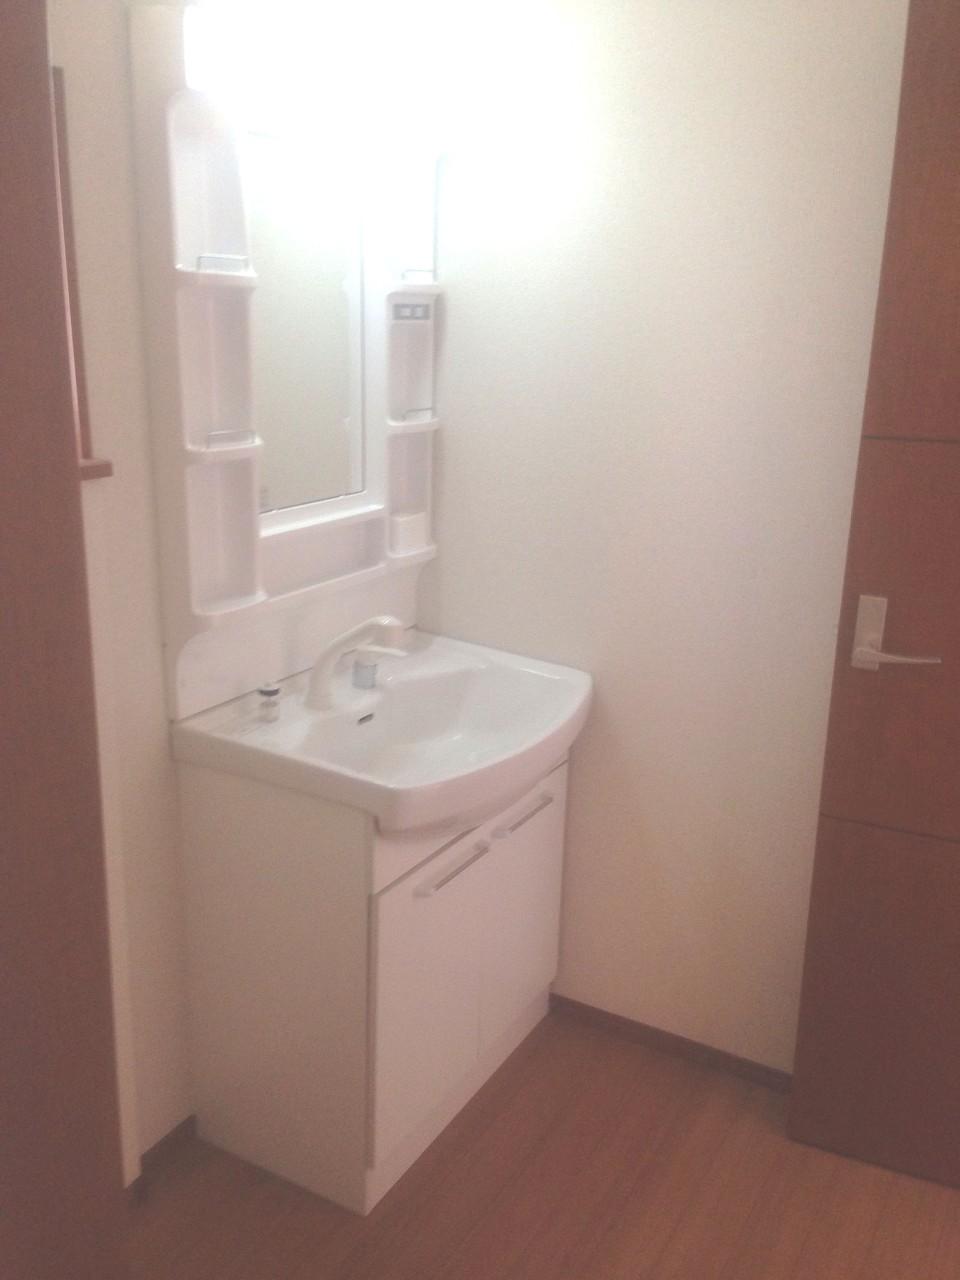 Wash basin, toilet. Vanity with shower